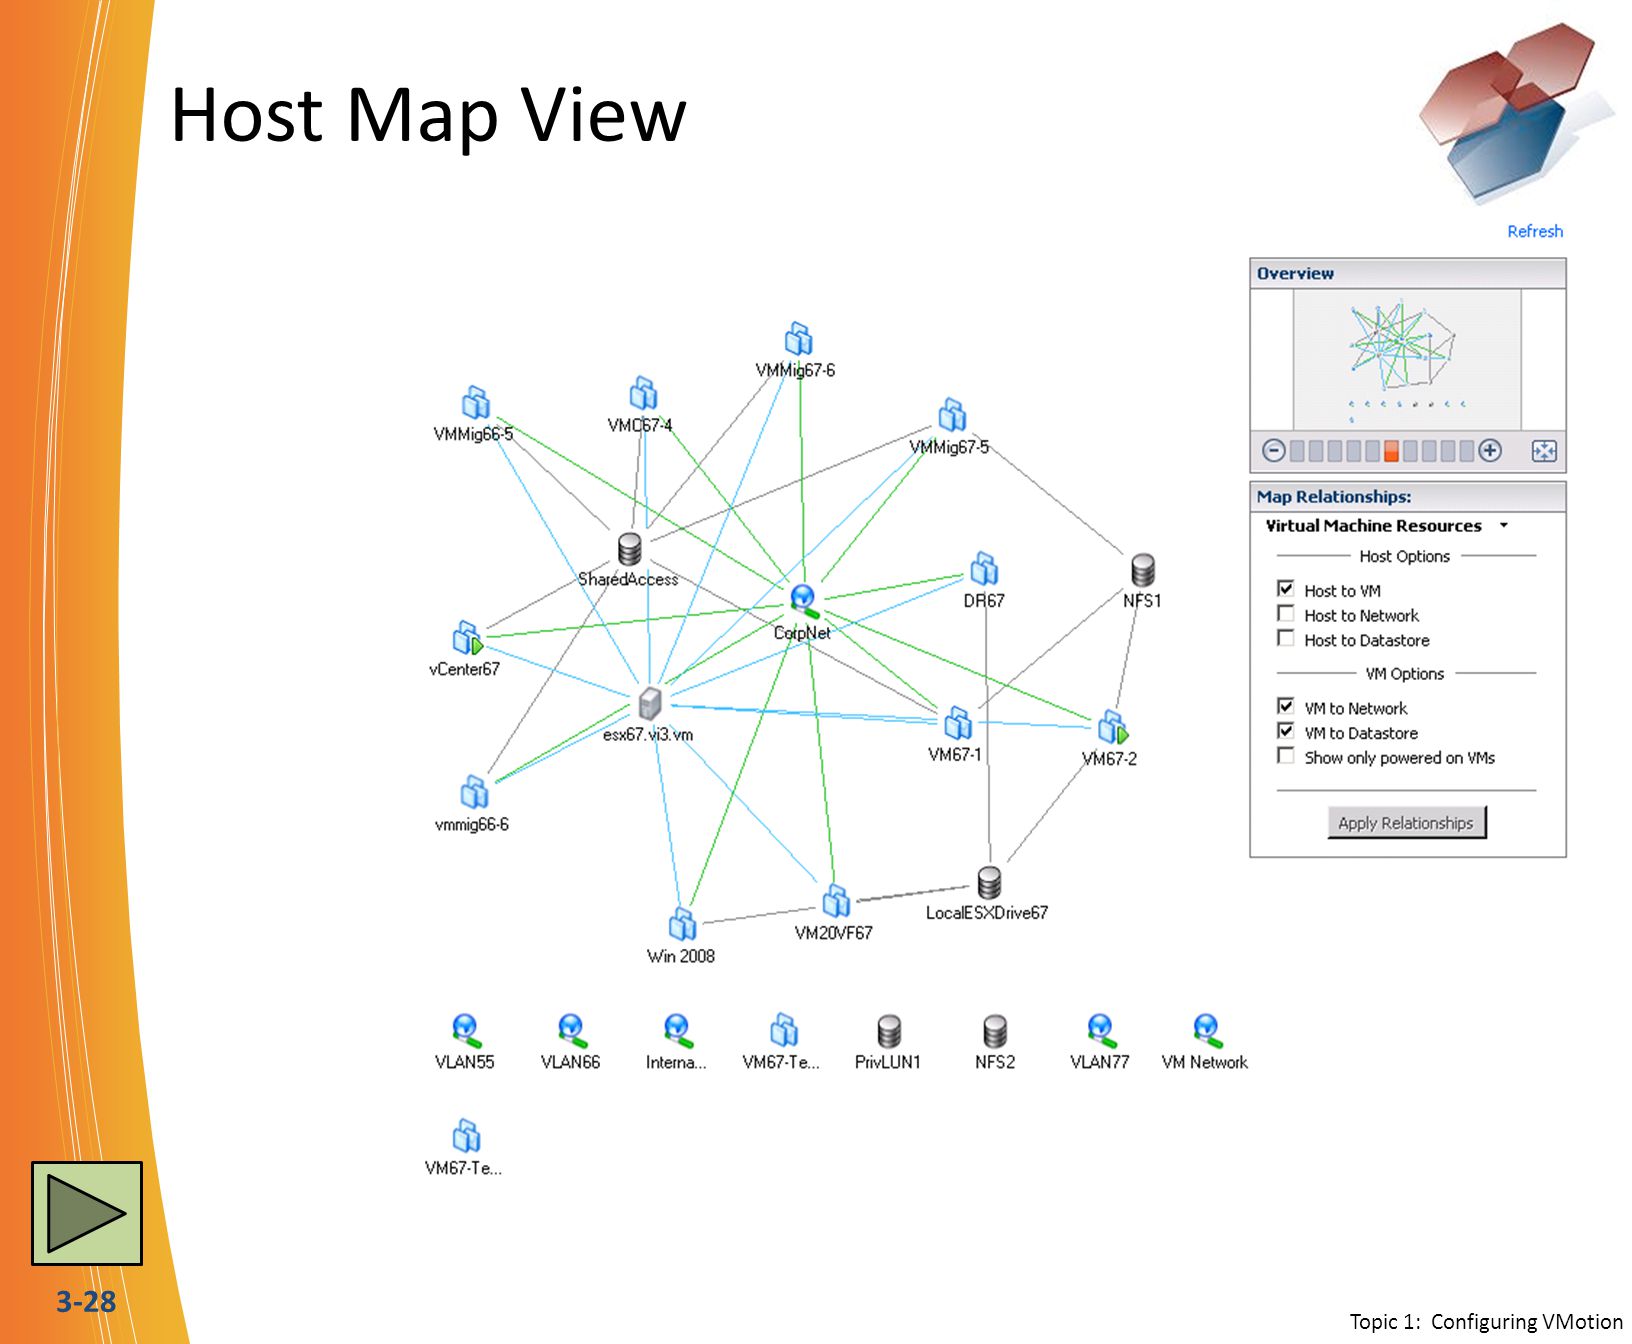 3-28 Cluster Map View: Host to Datastore Topic 1: Configuring VMotion Cluster Map View: Host to Network Cluster Map View: Host to VM Cluster Map View: VM to Network Cluster Map View: VM to Datastore Cluster Map View: Host to Network and Datastore Cluster Map ViewHost Map View